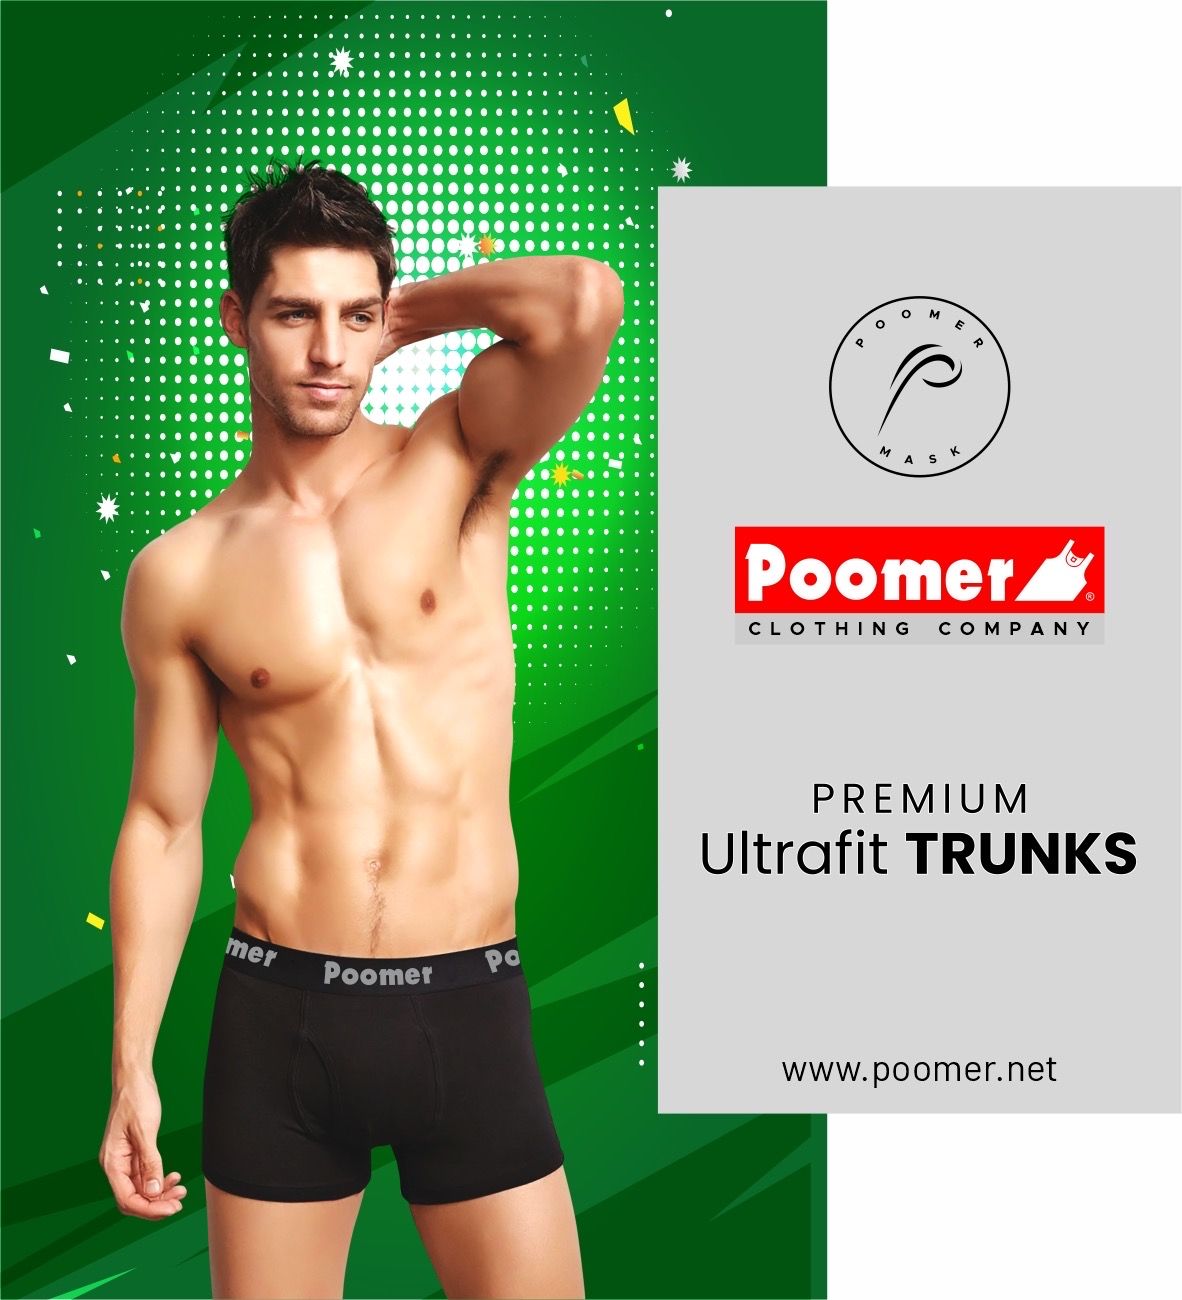 Poomer on X: Stay fresh and feel the comfort. Poomer Premium